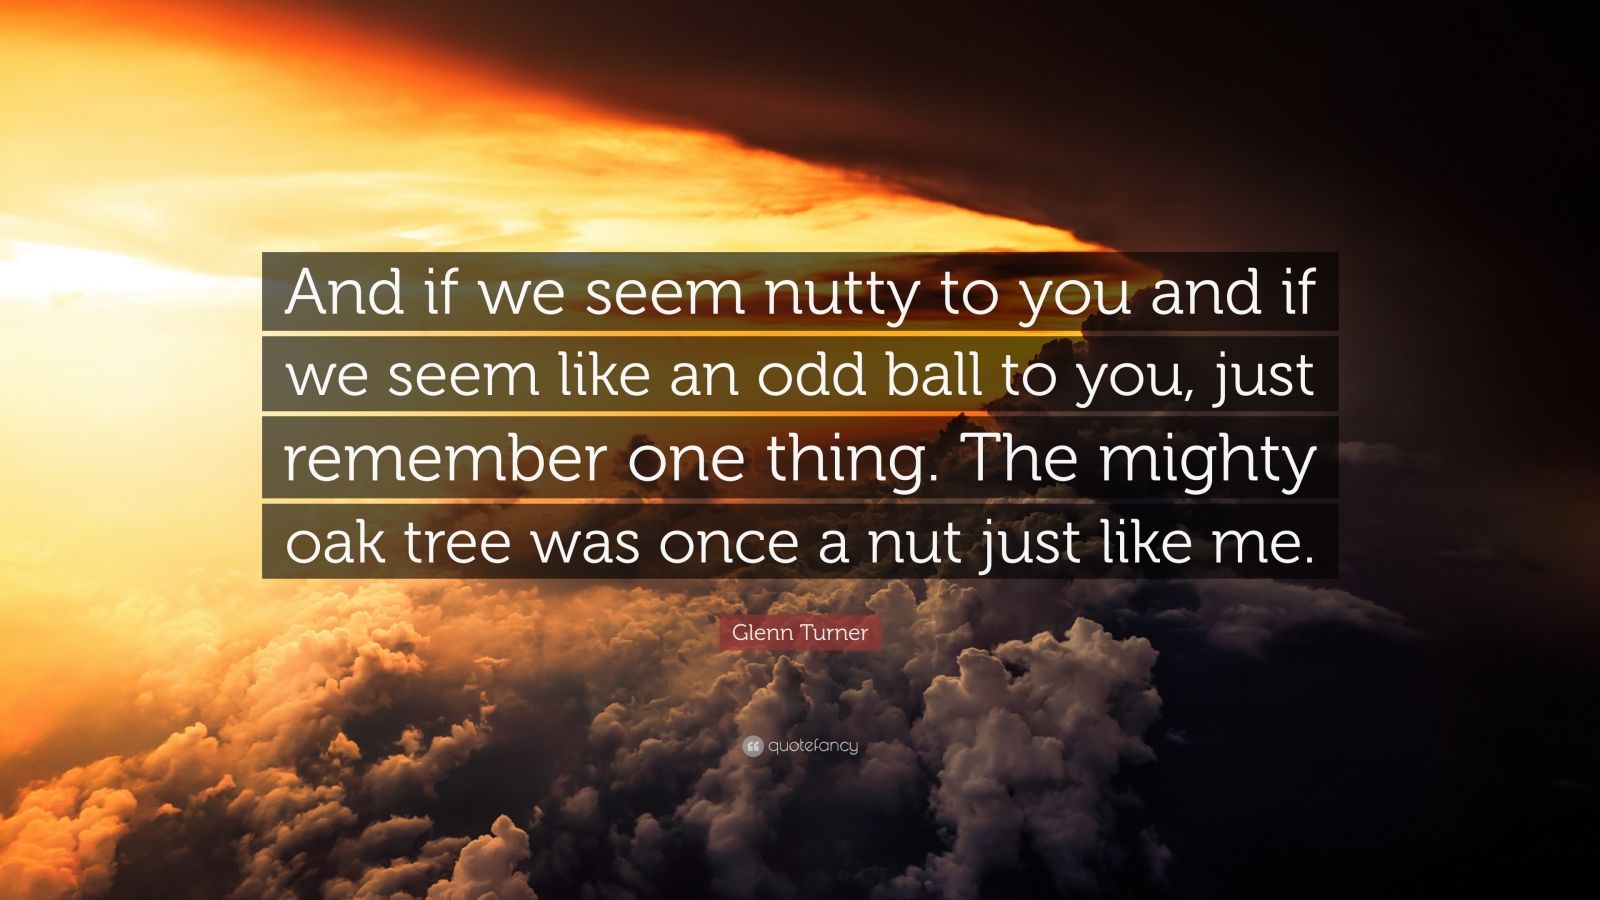 Glenn Turner Quote: "And if we seem nutty to you and if we seem like an odd ball to you, just ...